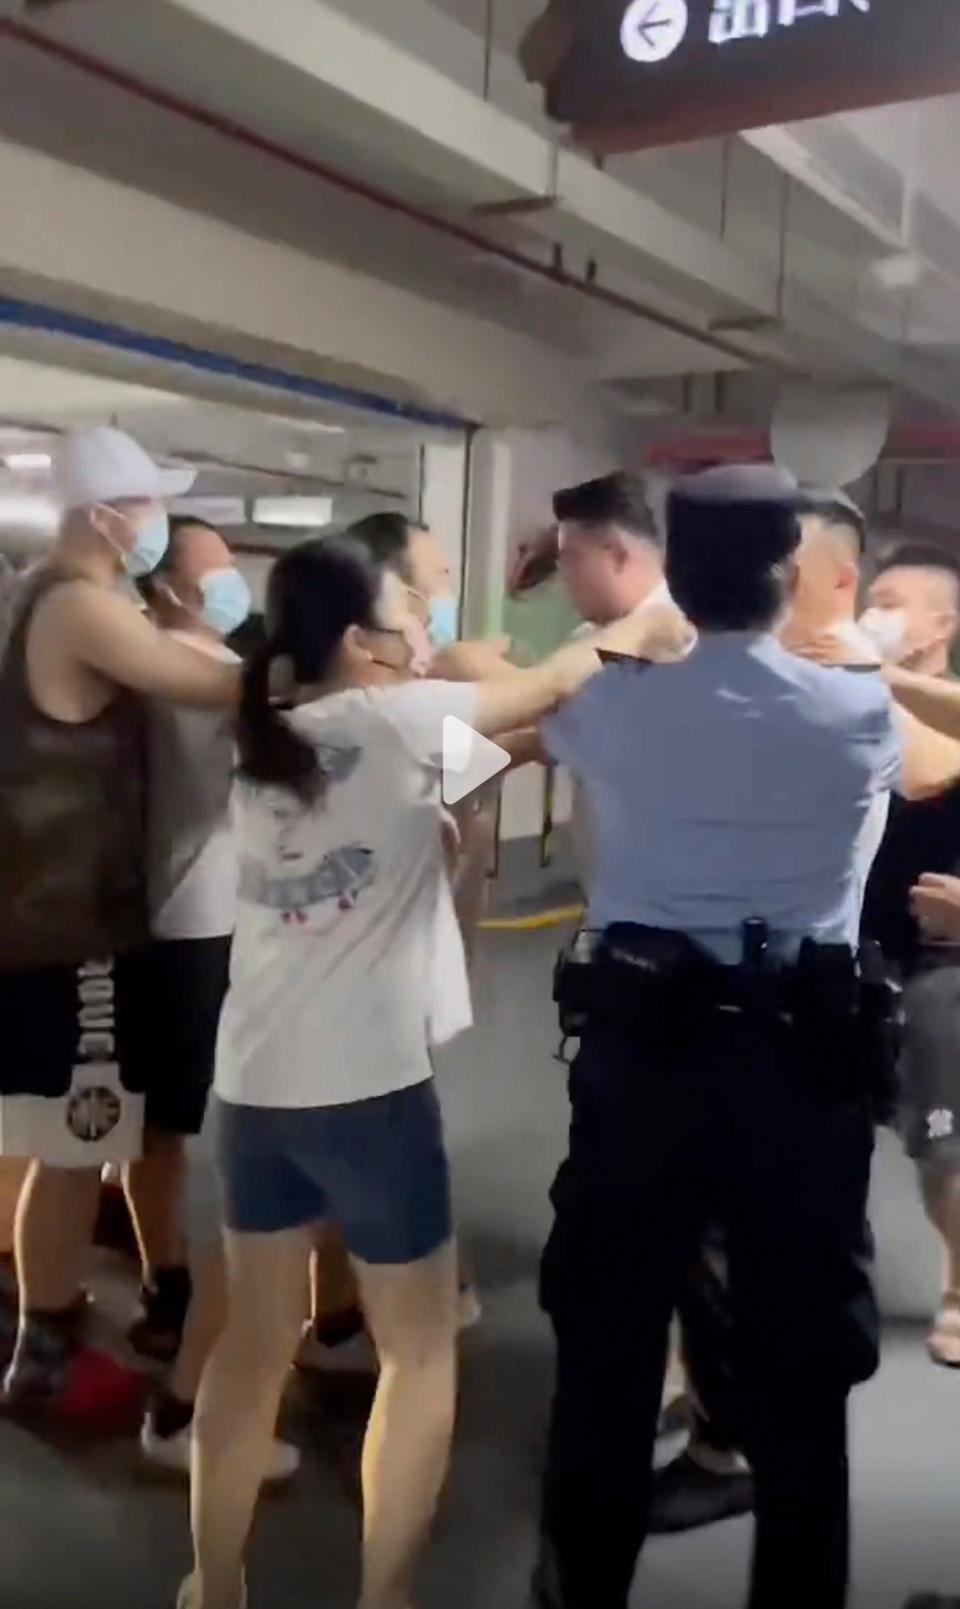 Some people from the crowd of onlookers began fighting with each other separately from the drivers; however it was unclear from the video as to why they became involved. Photo: Douyin